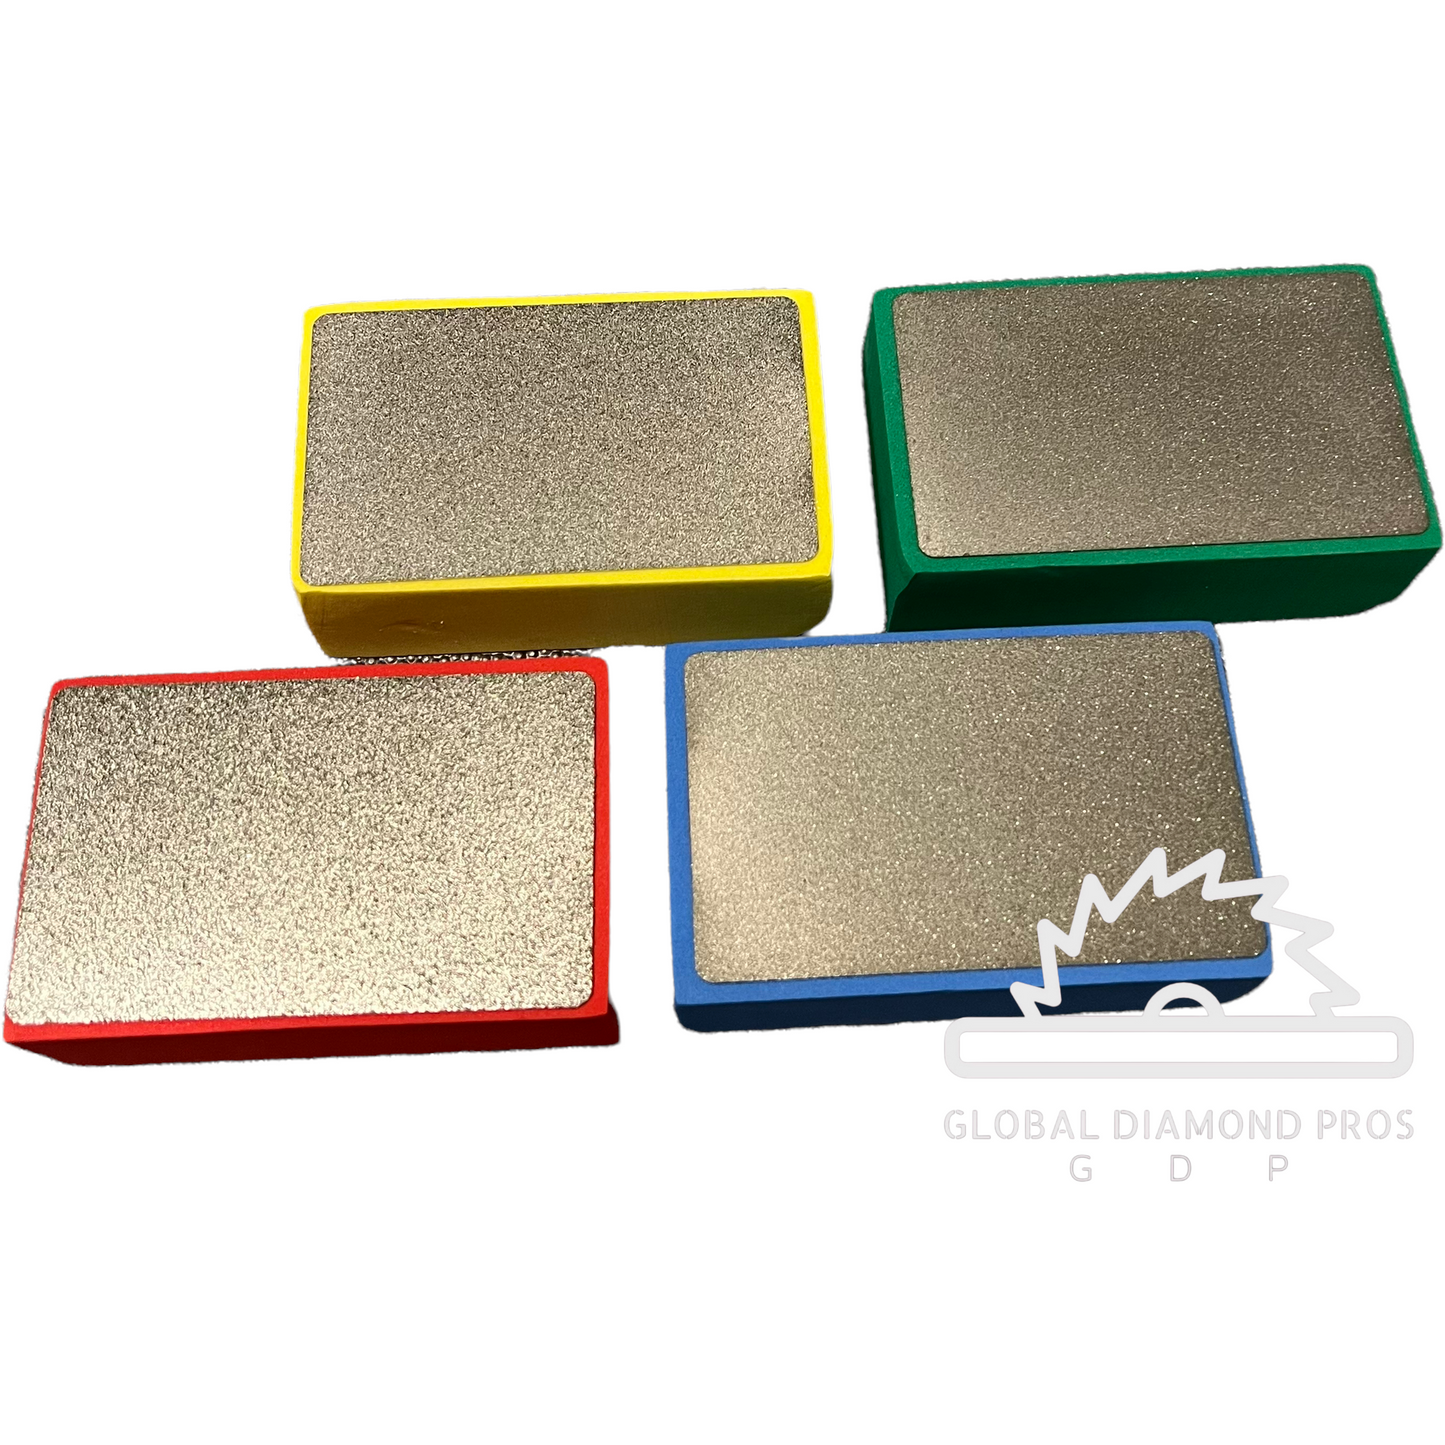 Diamond Hand Polishing Pads for Concrete Grinding, Marble, Granite, Stone & More, Grit #60-#400